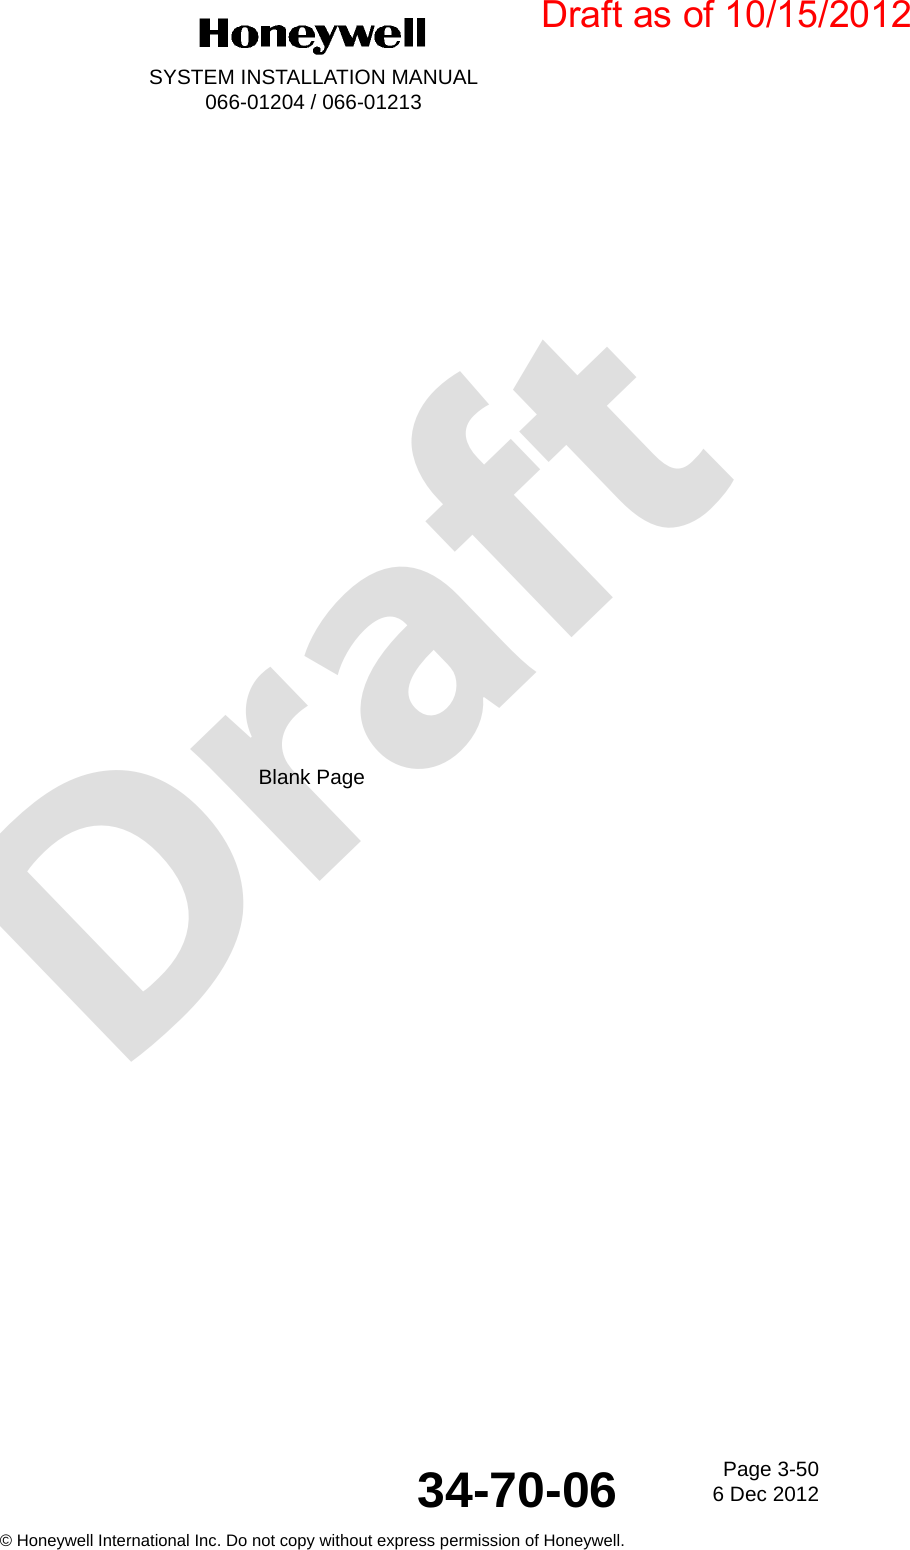 DraftPage 3-506 Dec 201234-70-06SYSTEM INSTALLATION MANUAL066-01204 / 066-01213© Honeywell International Inc. Do not copy without express permission of Honeywell.Blank PageDraft as of 10/15/2012